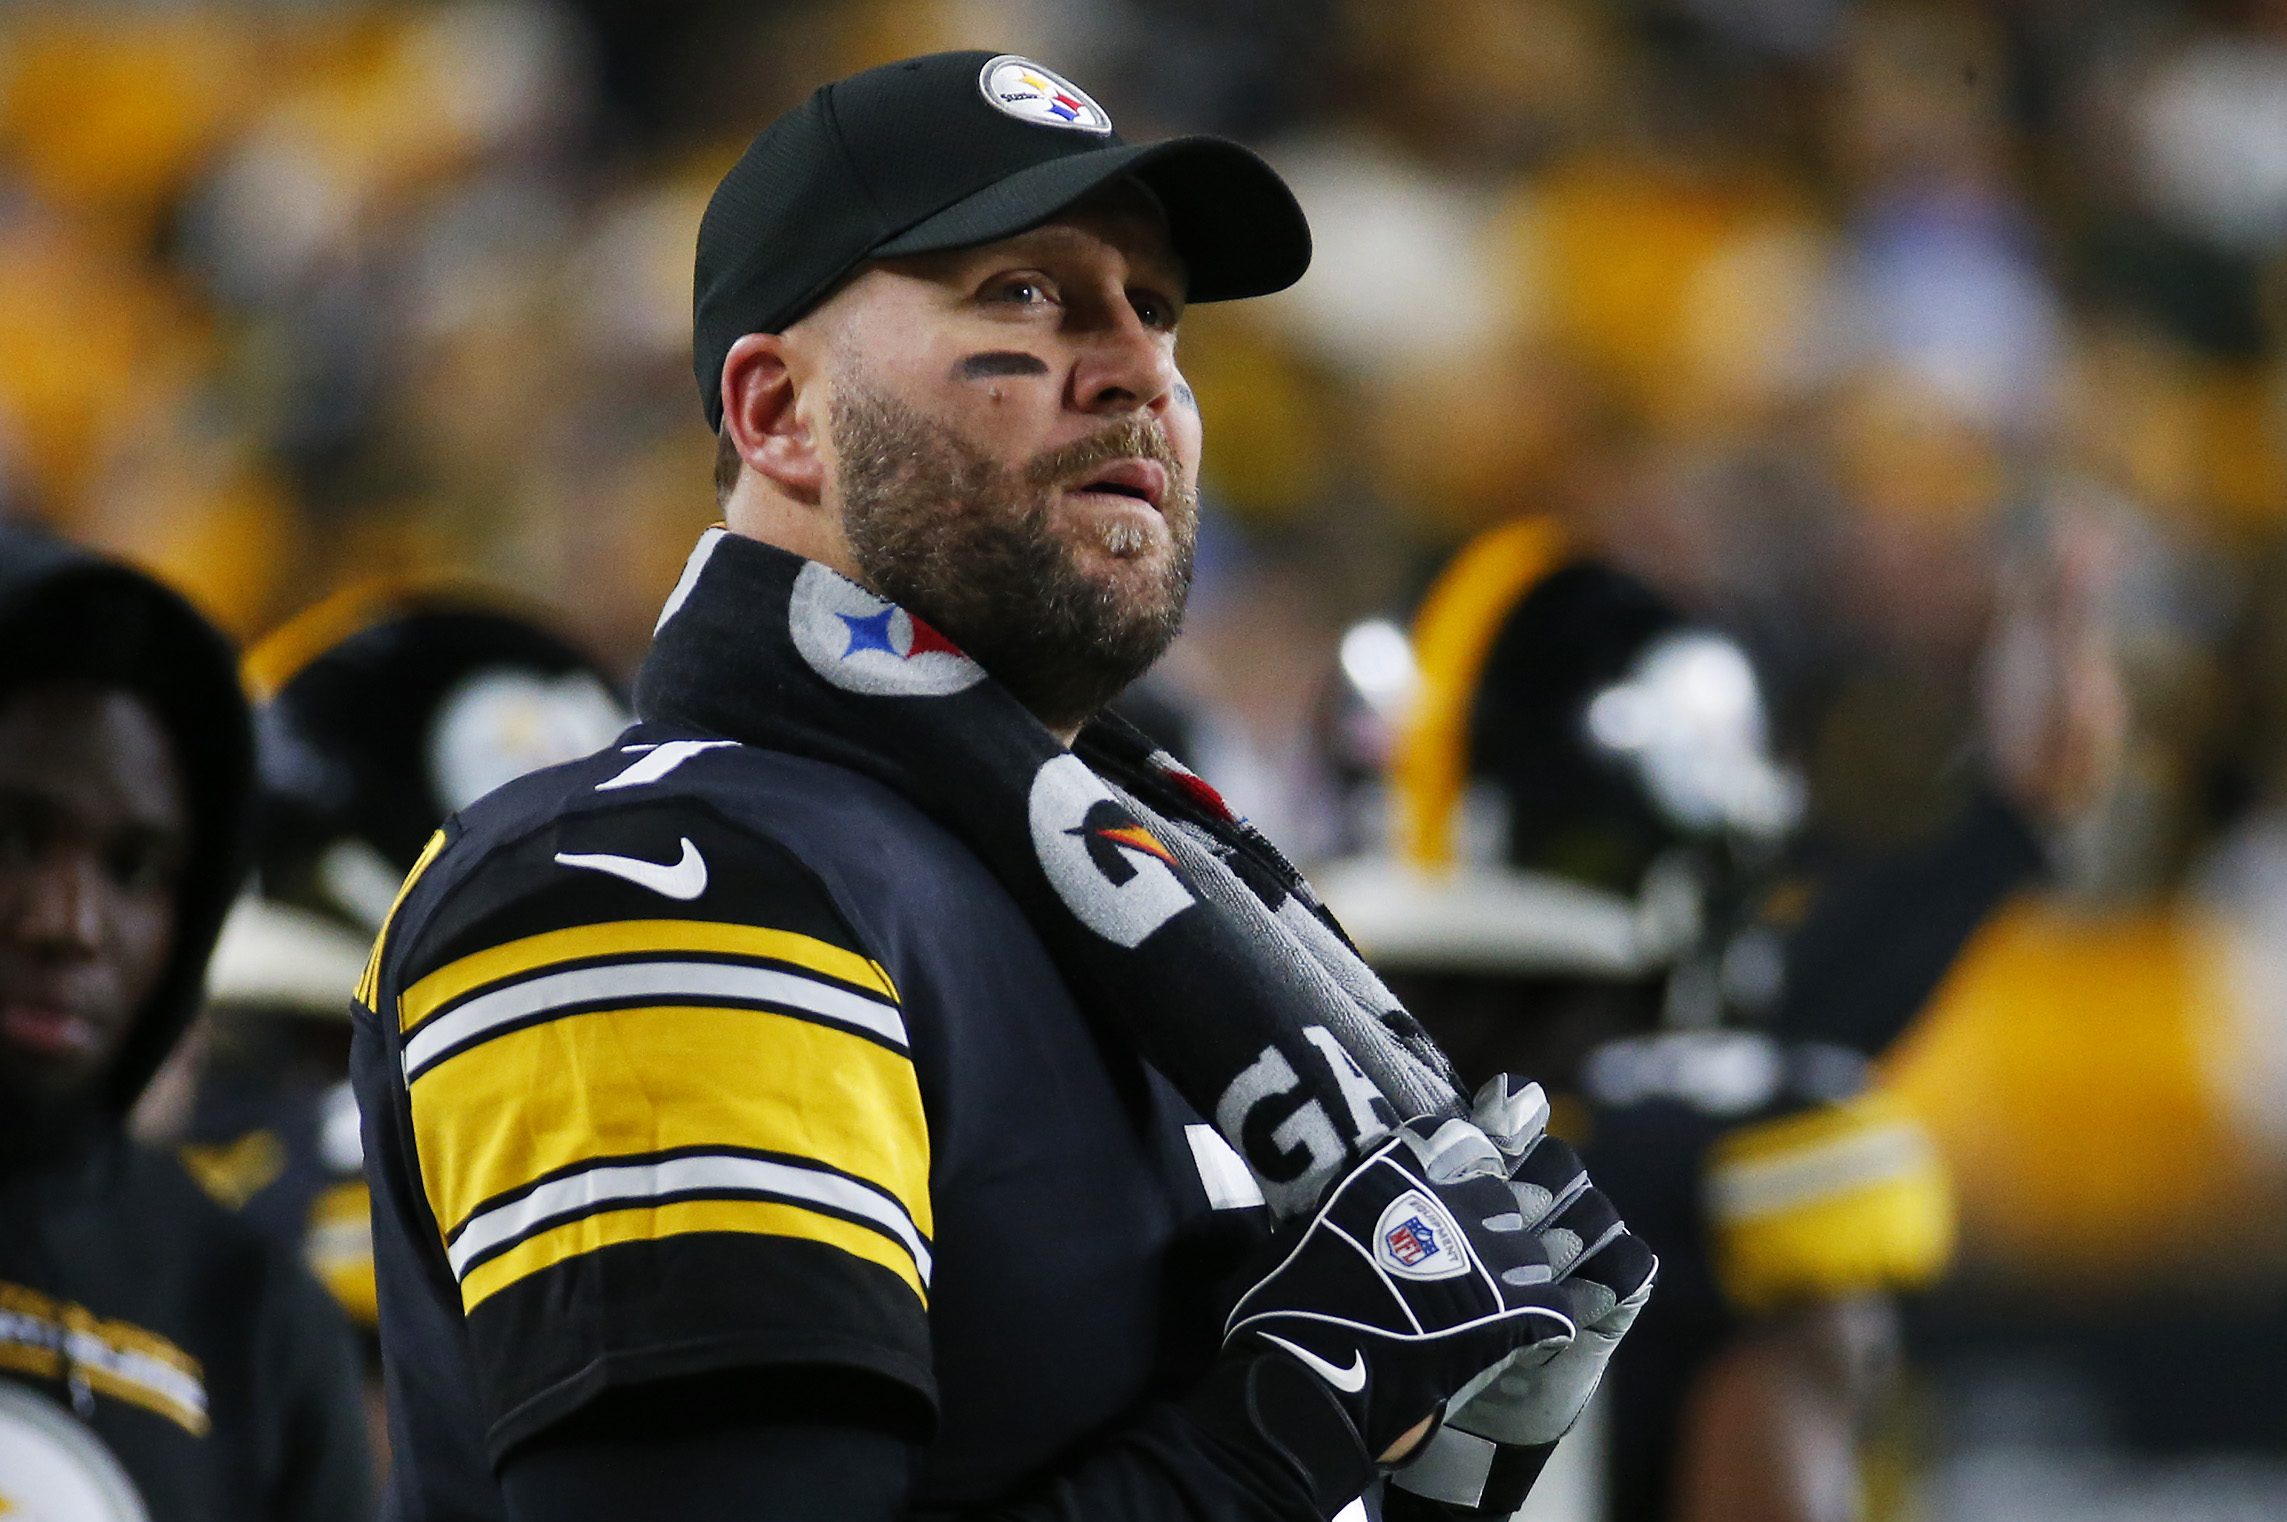 Ben Roethlisberger of the Pittsburgh Steelers watches against the Baltimore Ravens at Heinz Field